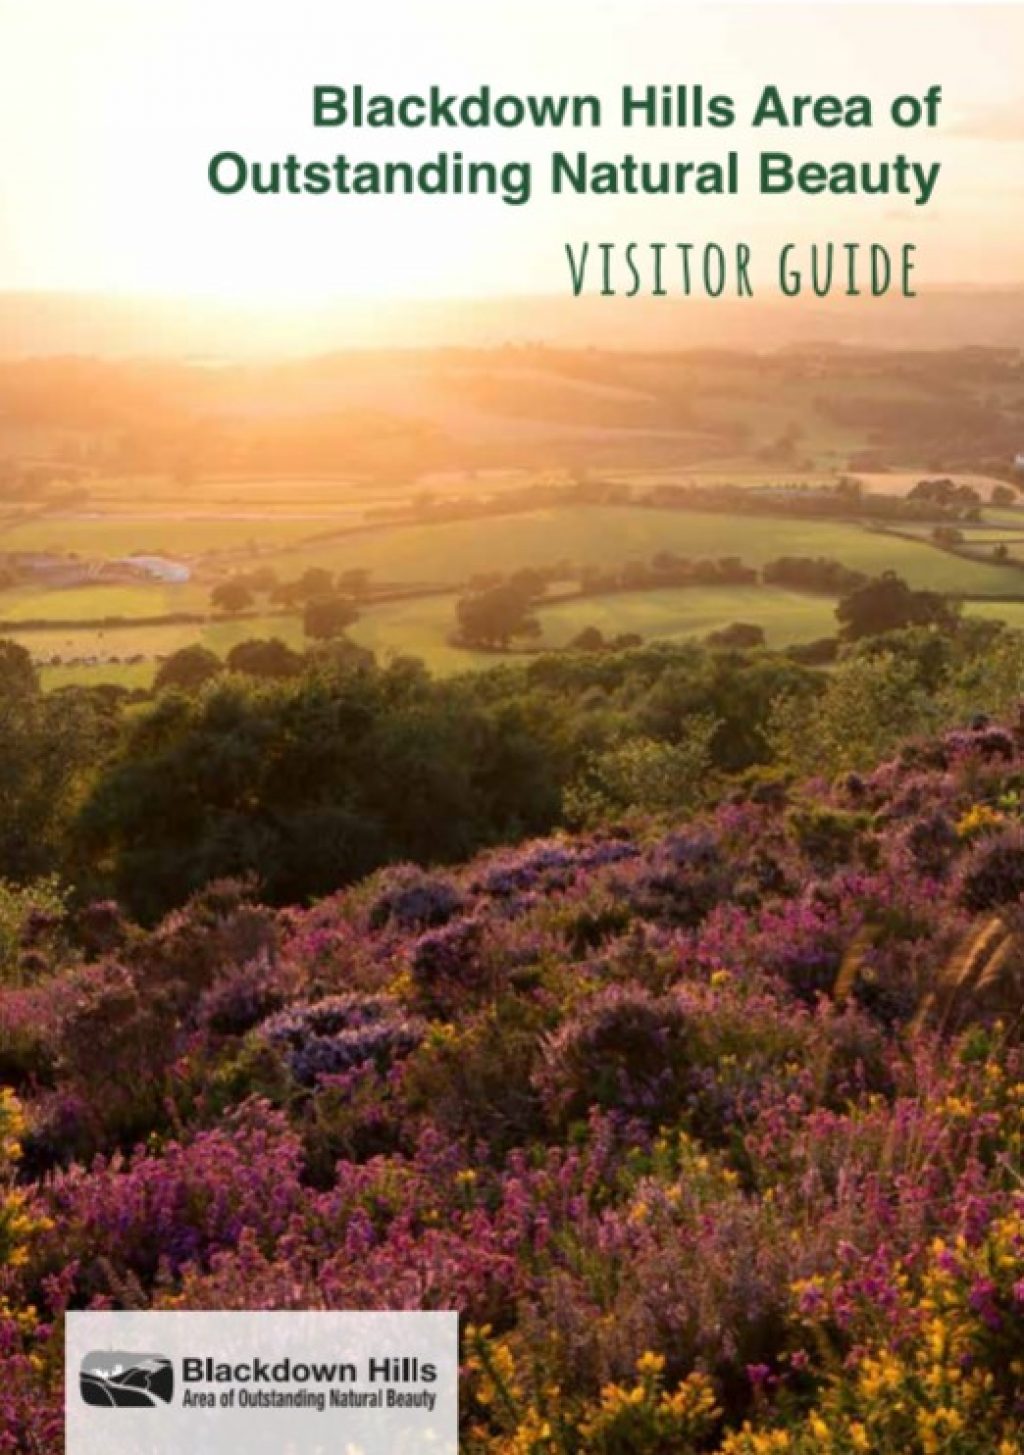 Blackdown Hills Area of Outstanding Natural Beauty Visitor Guide